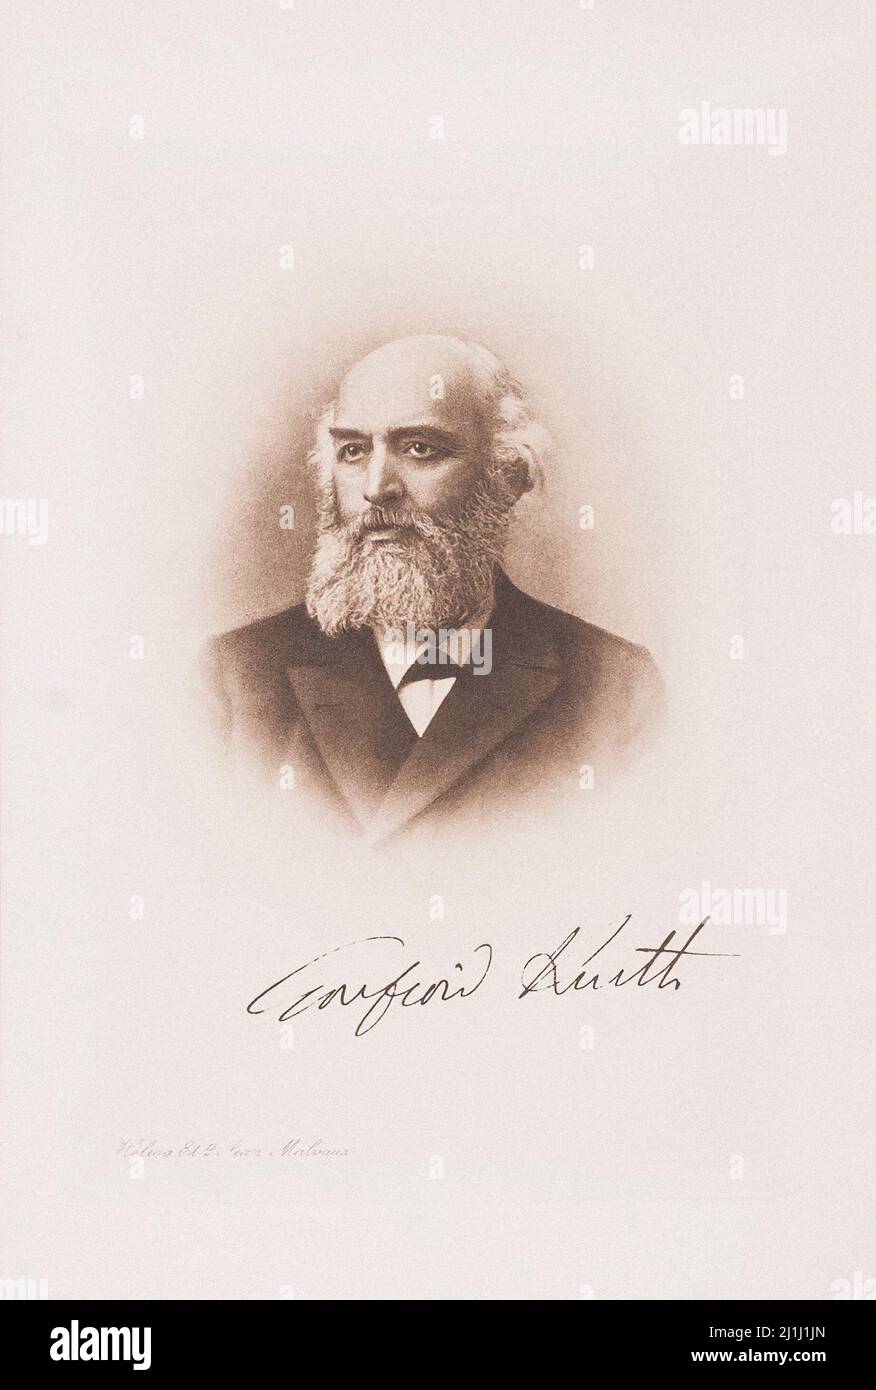 Portrait of Godefroid Kurth.  Godefroid Kurth (1847–1916) was a celebrated Belgian historian and pioneering Christian democrat. He is known for his hi Stock Photo